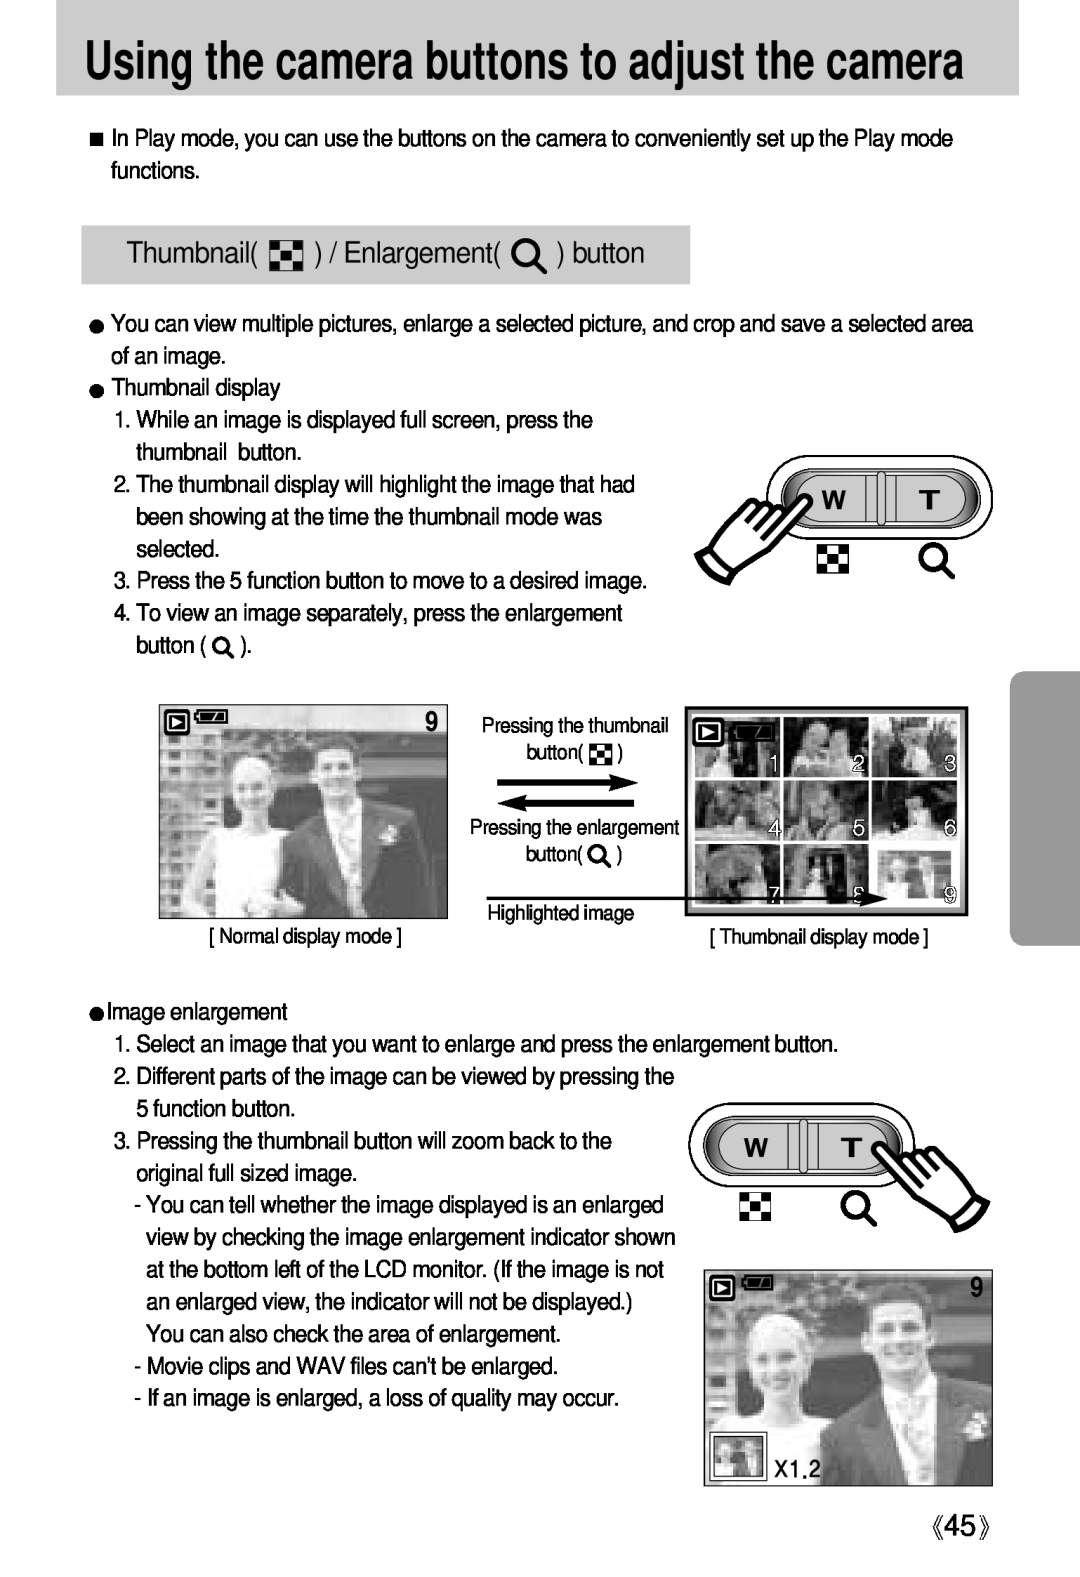 Samsung Digimax U-CA user manual Using the camera buttons to adjust the camera, Thumbnail / Enlargement button 